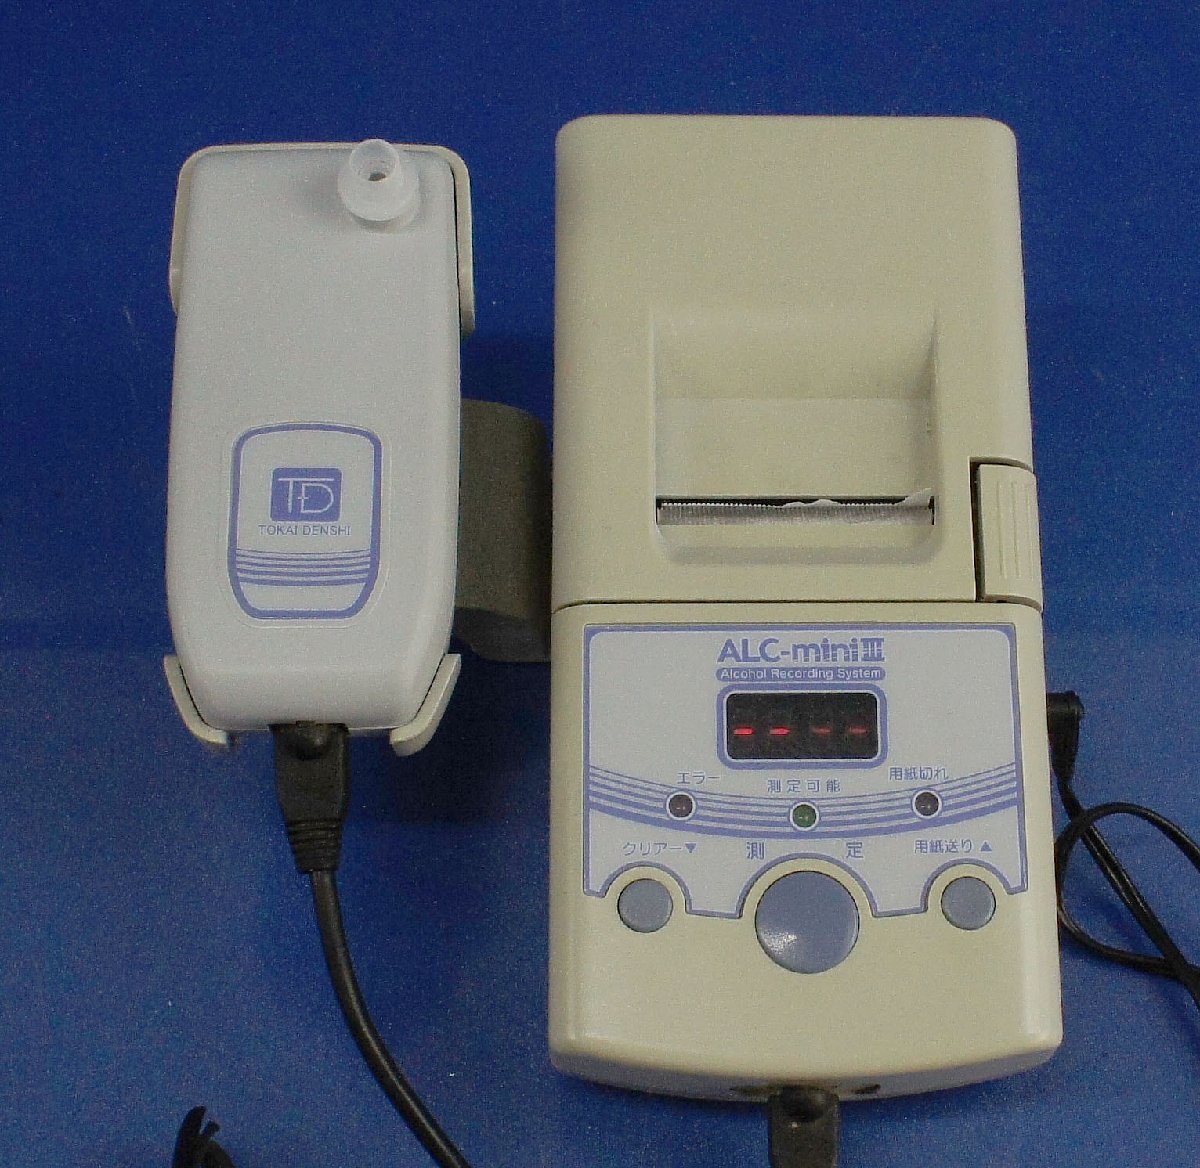  with translation electrification verification only print with function Tokai electron ALC-mini3 alcohol measuring instrument miniIII checker inspection .F012605